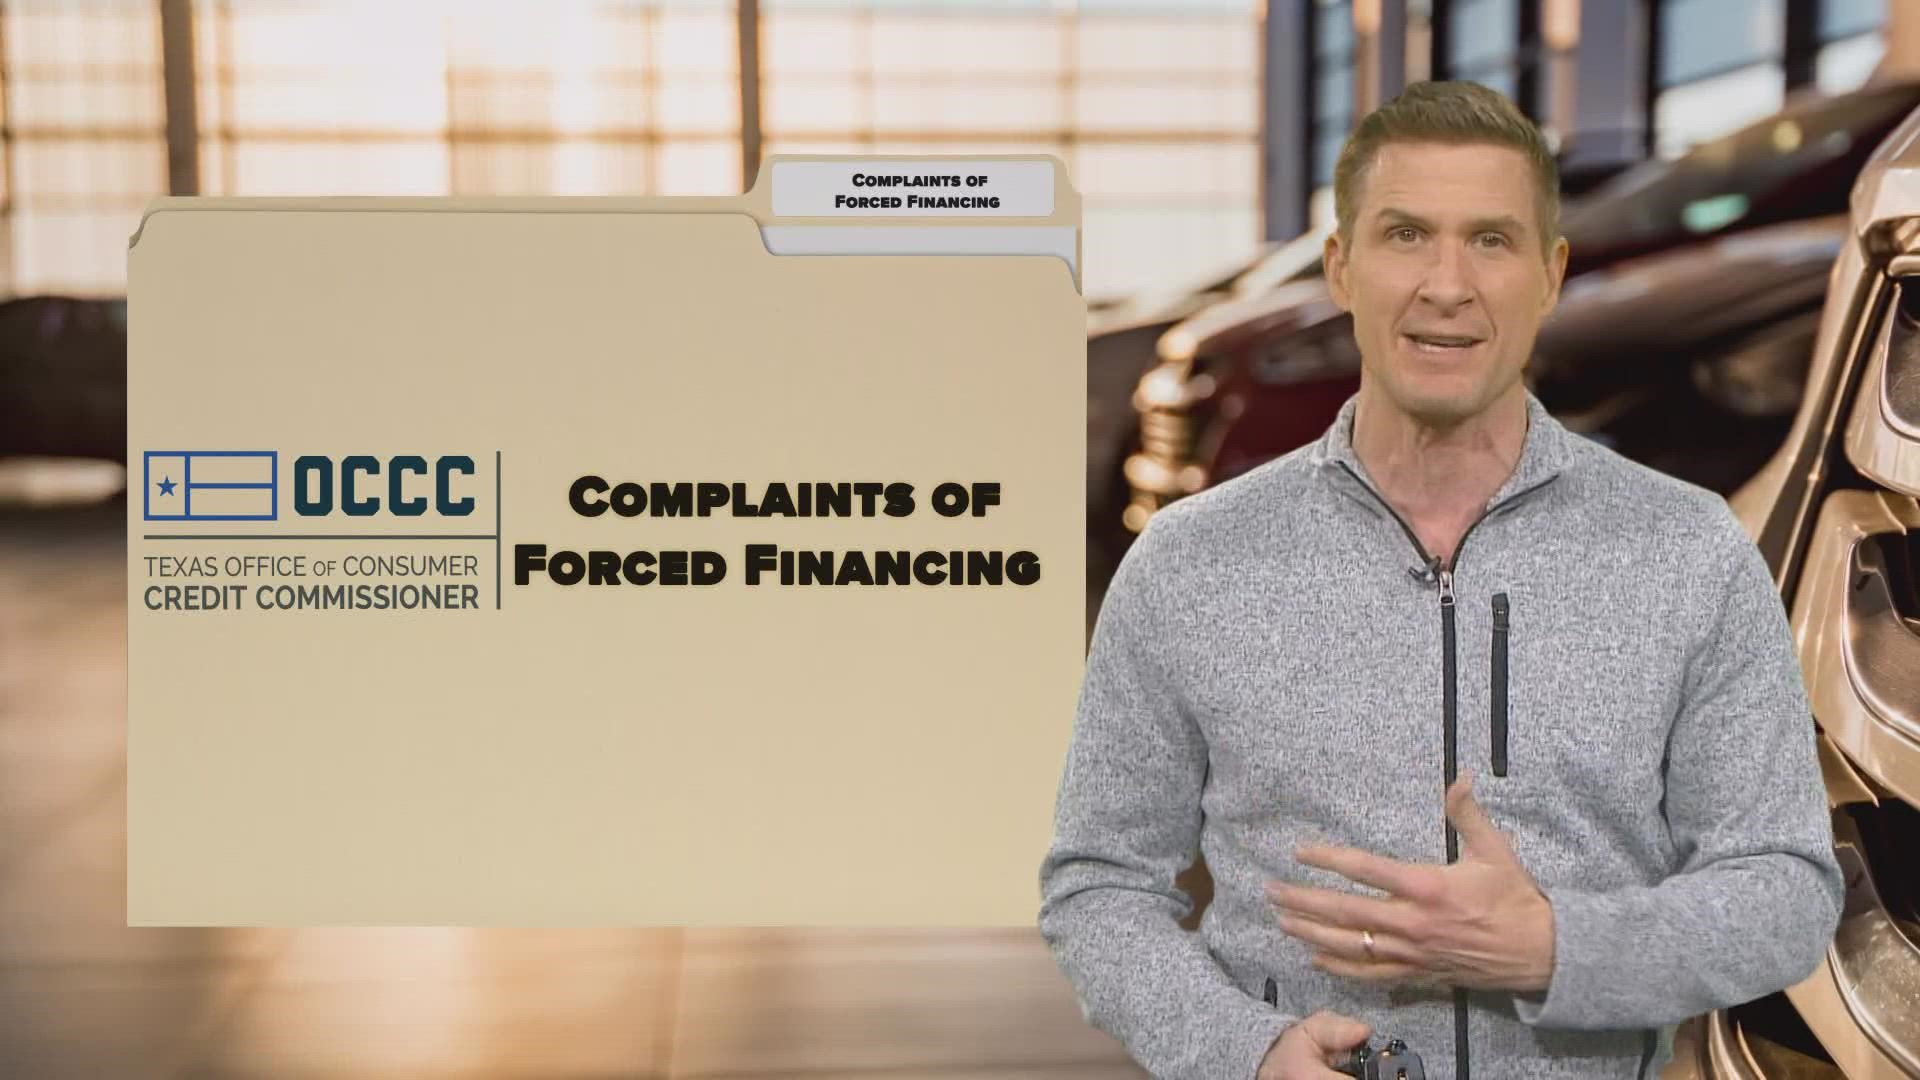 Months ago, the OCCC said, “we are concerned,” when WFAA's Jason Wheeler first alerted them to the practice of dealerships refusing outside financing.